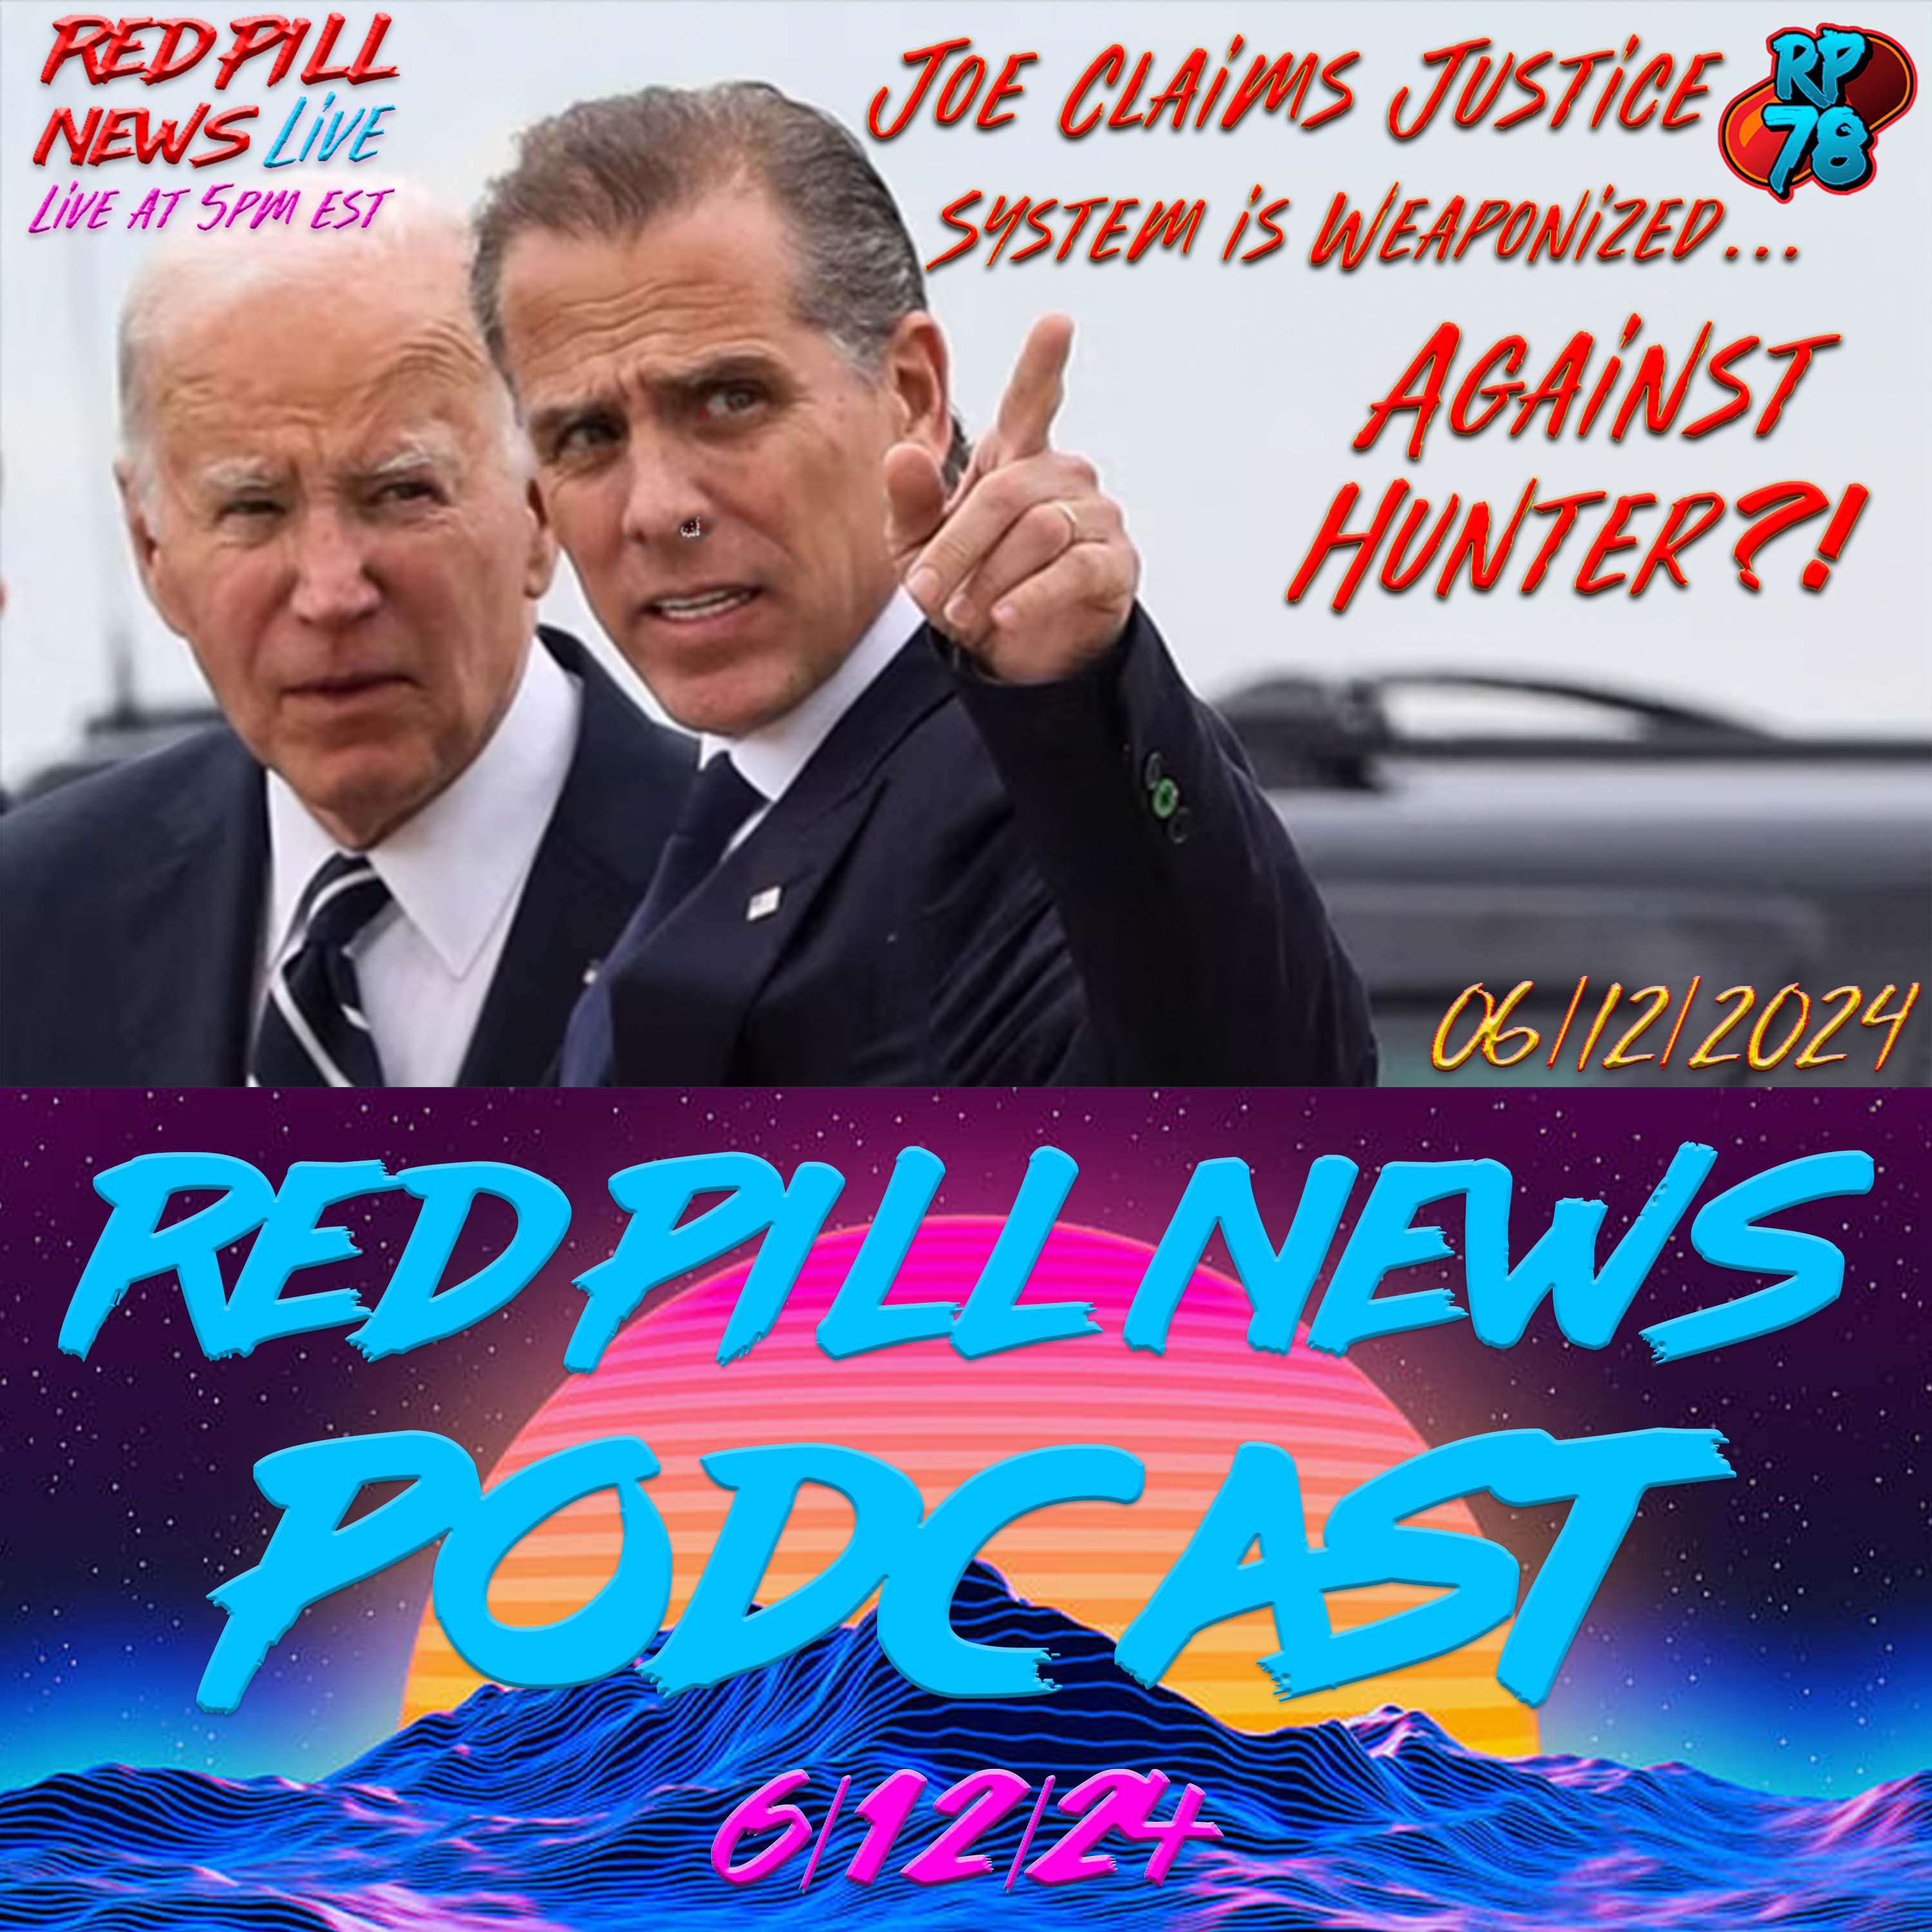 Joe Says US Justice System is RIGGED (Against Hunter…) on Red Pill News Live